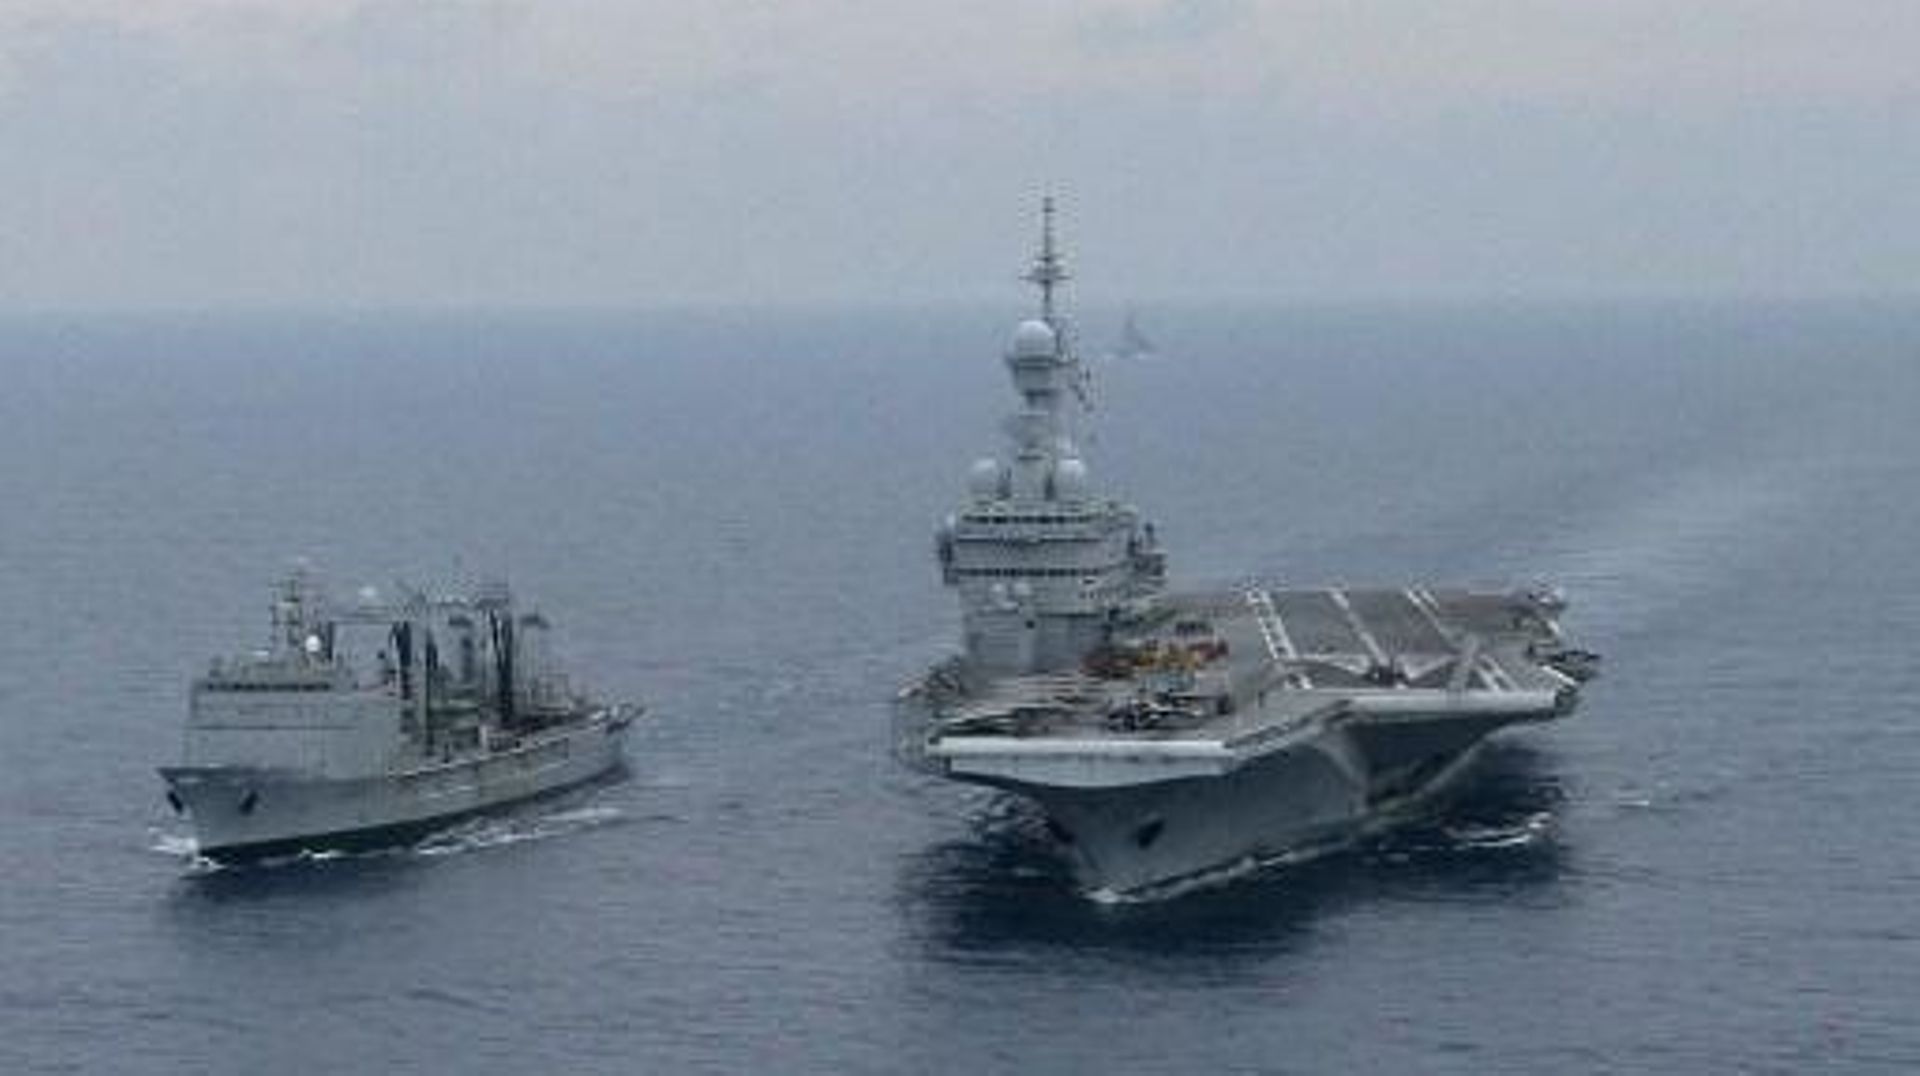 This aerial view taken from a Puma helicopter on April 22, 2011 shows the Charles de Gaulle aircraft carrier (R) and the French Navy auxiliary Ship Meuse (L) in the Mediteranean sea, as part of the military operations of the NATO coalition in Libya.  NATO